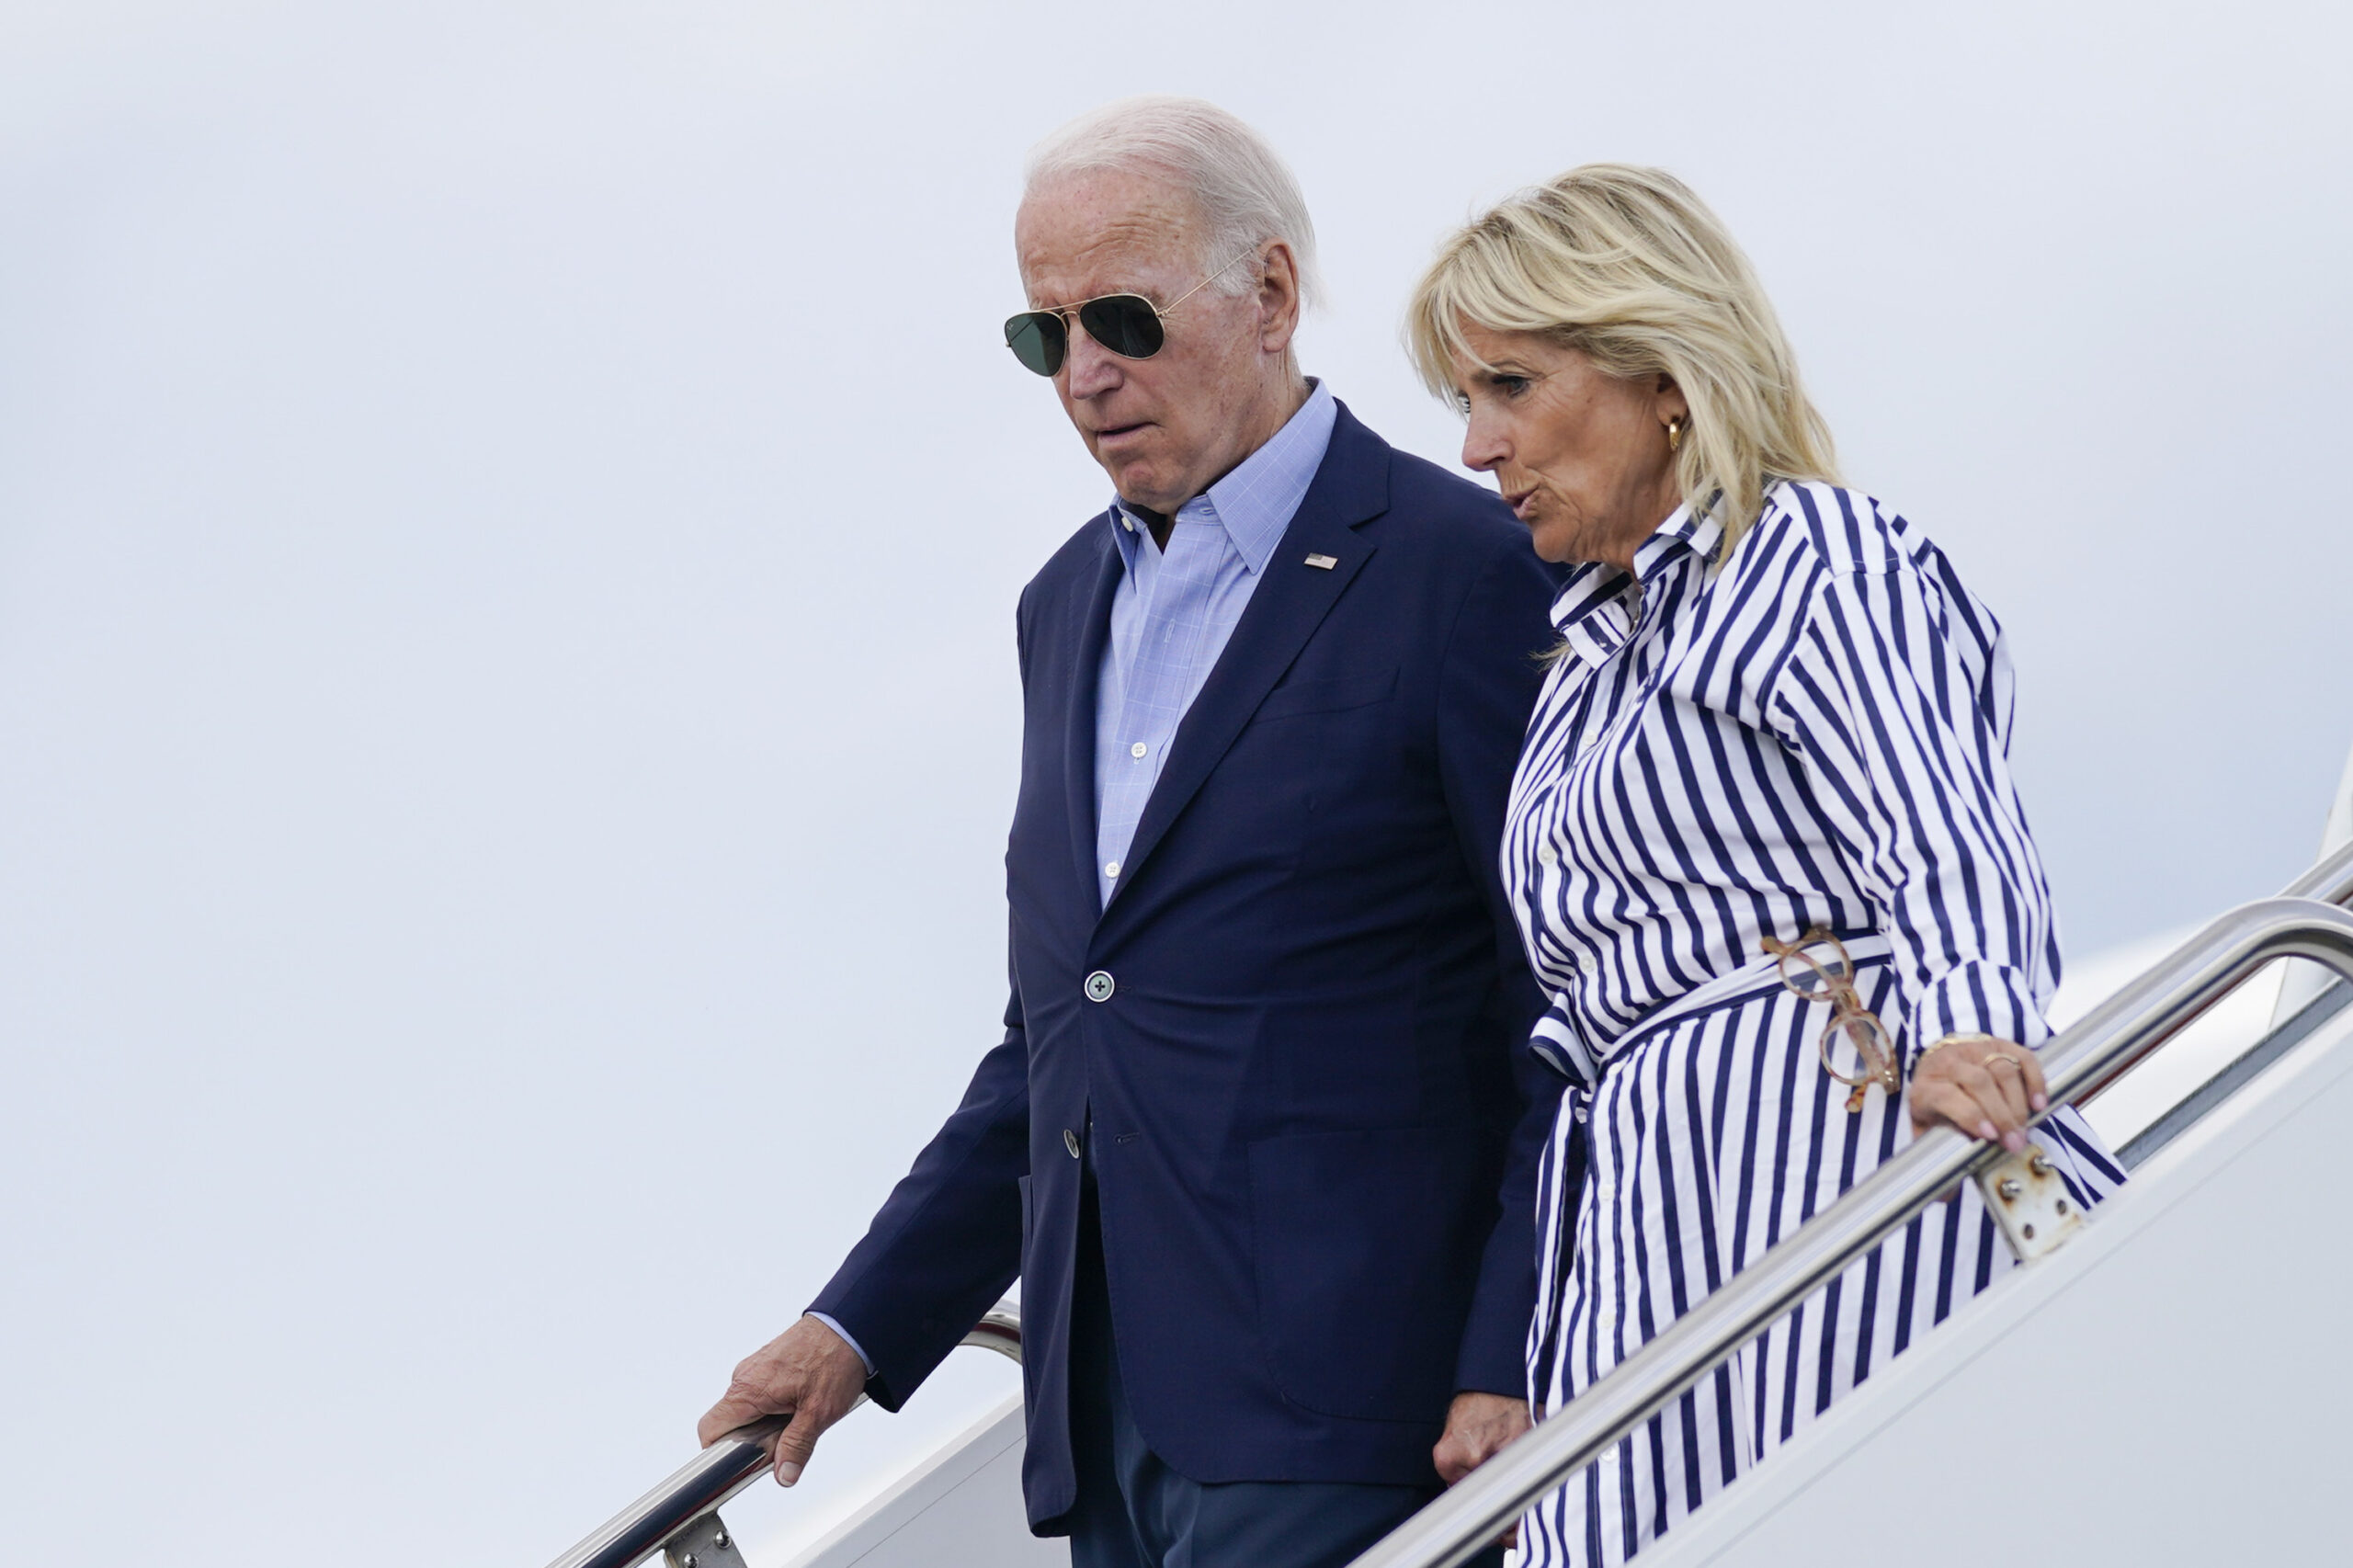 President Joe Biden and first lady Jill Biden arrive at Andrews Air Force Base after spending the day in Kentucky touring areas impacted by floods, Monday, Aug. 8, 2022, at Andrews Air Force Base, Md. (AP Photo/Evan Vucci)